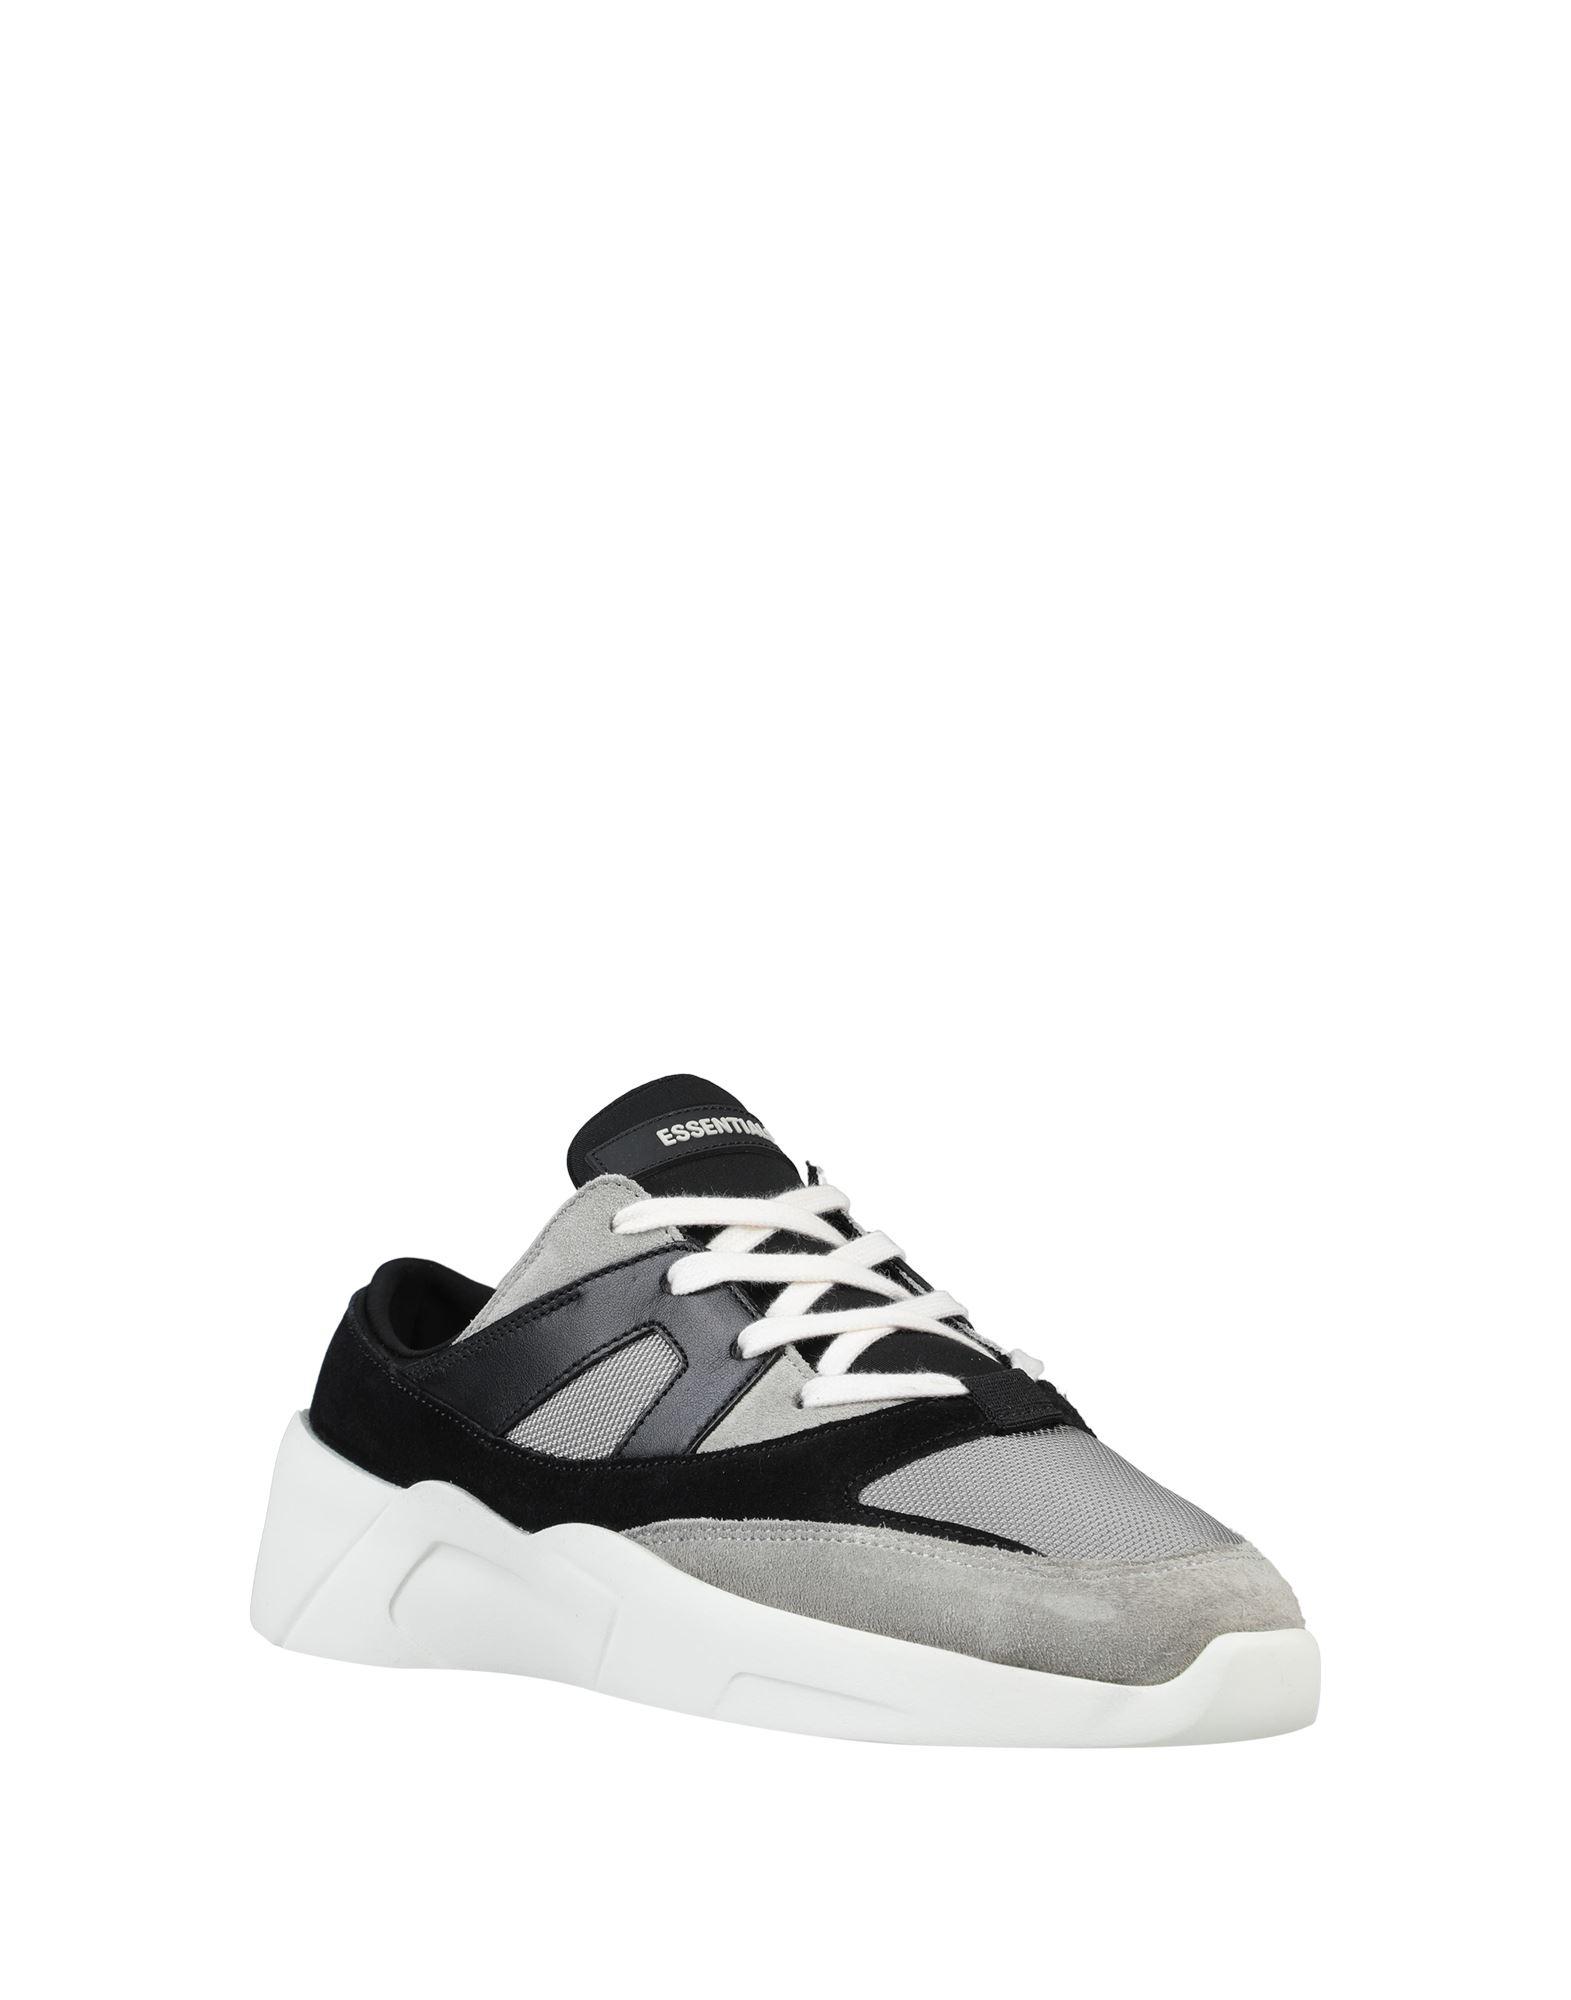 Fear of God ESSENTIALS Sneakers in Black | Lyst